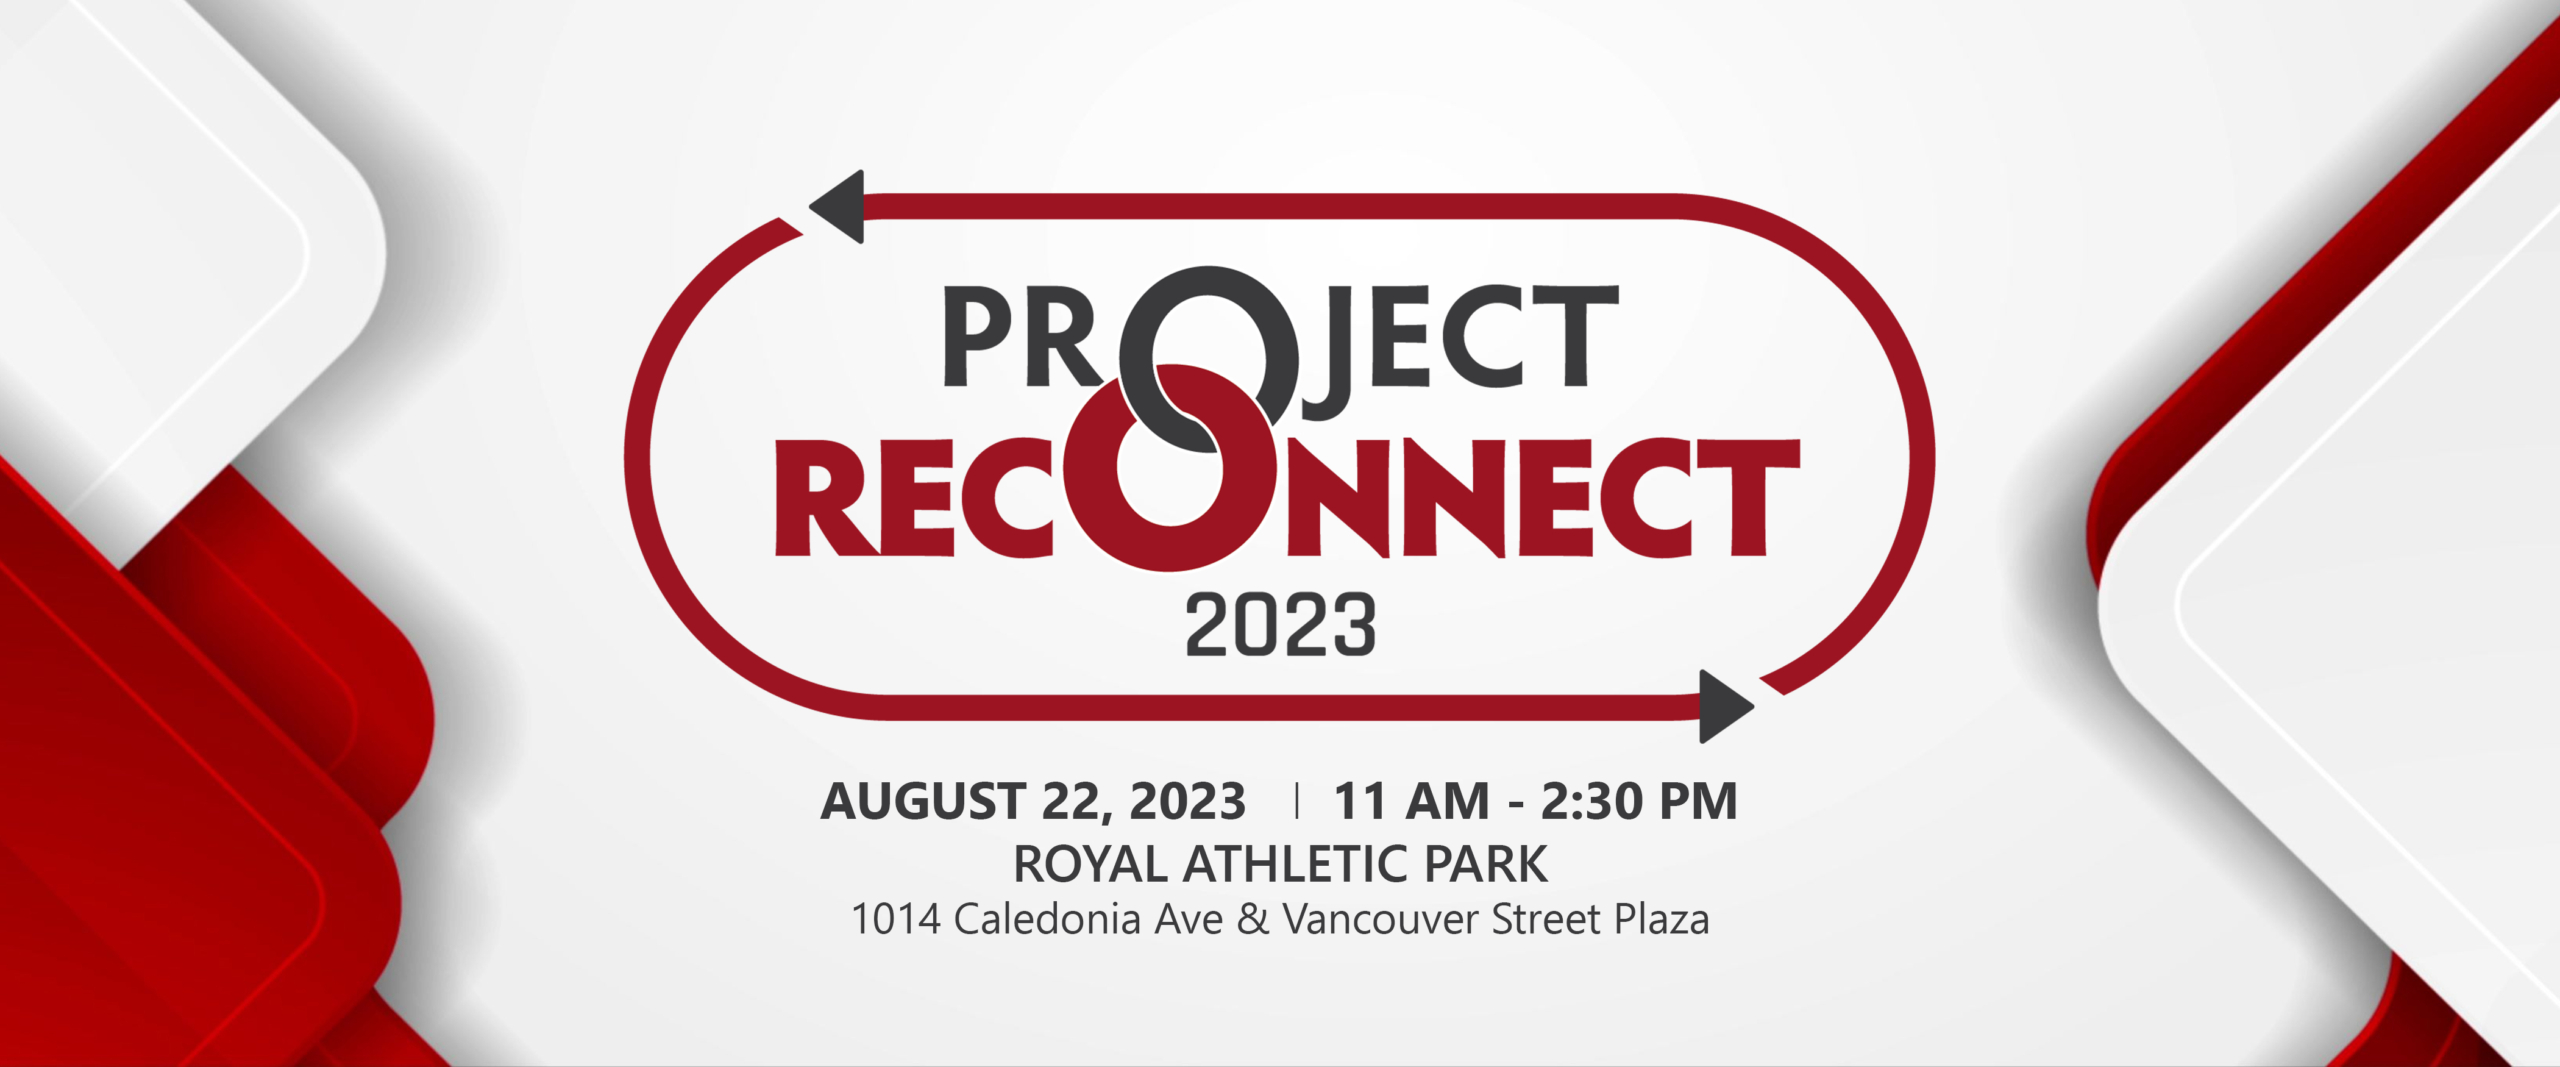 Project Reconnect to Take Place Tues., Aug. 22